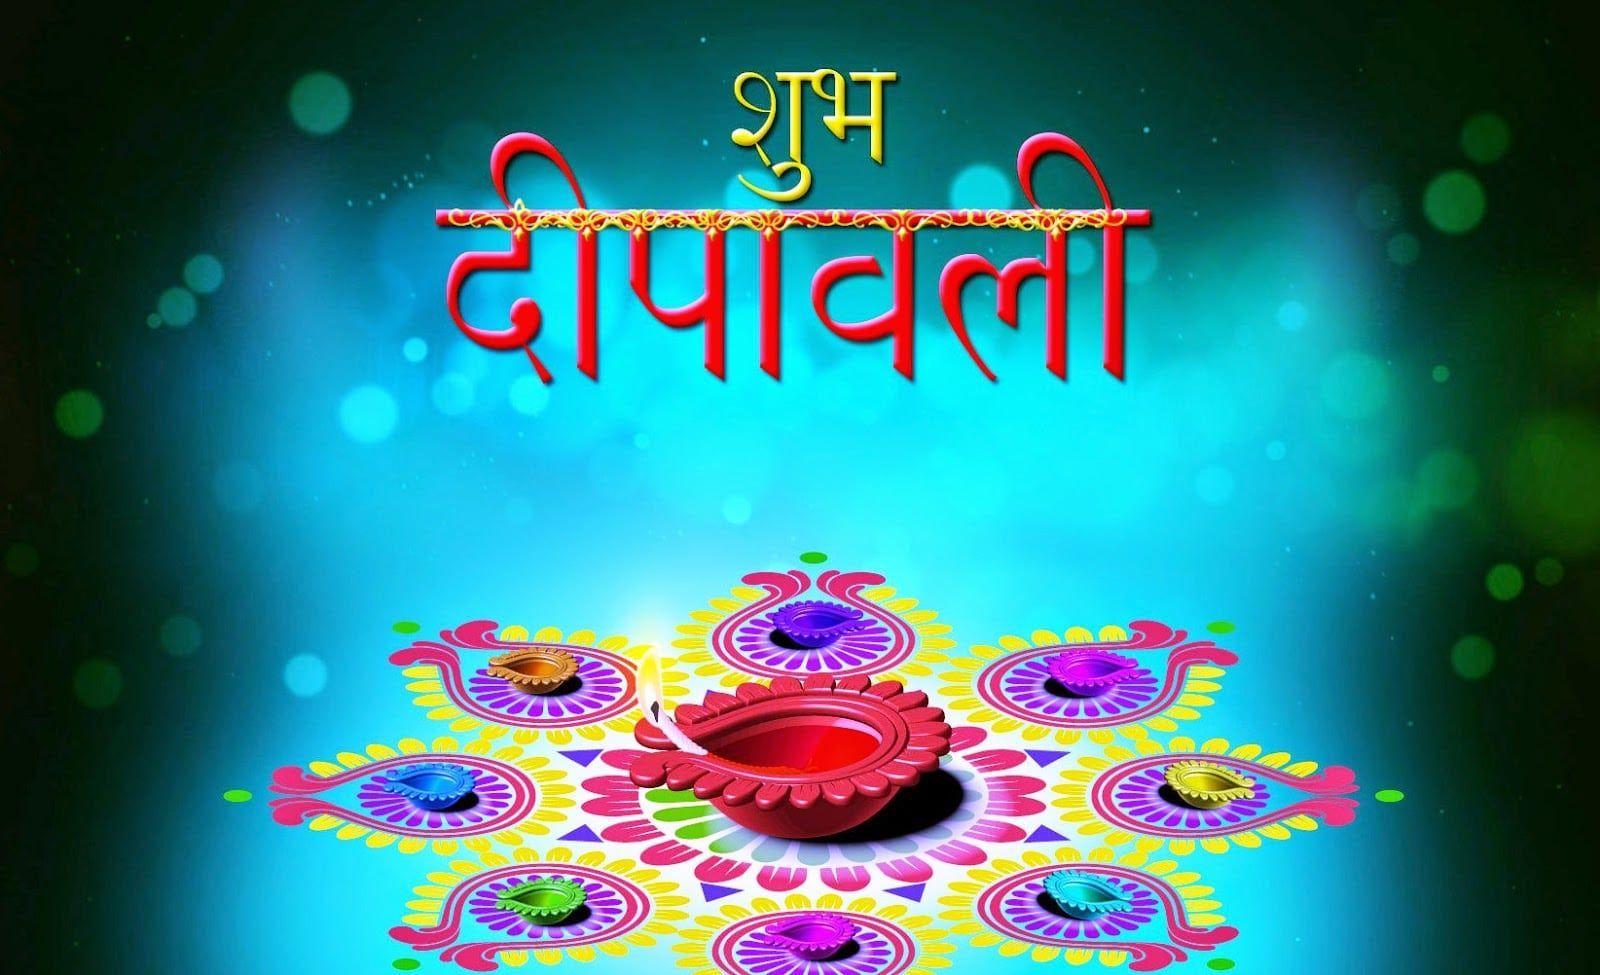 Happy Diwali 2019 * HD Image, Wishes, SMS, Quotes, Photo